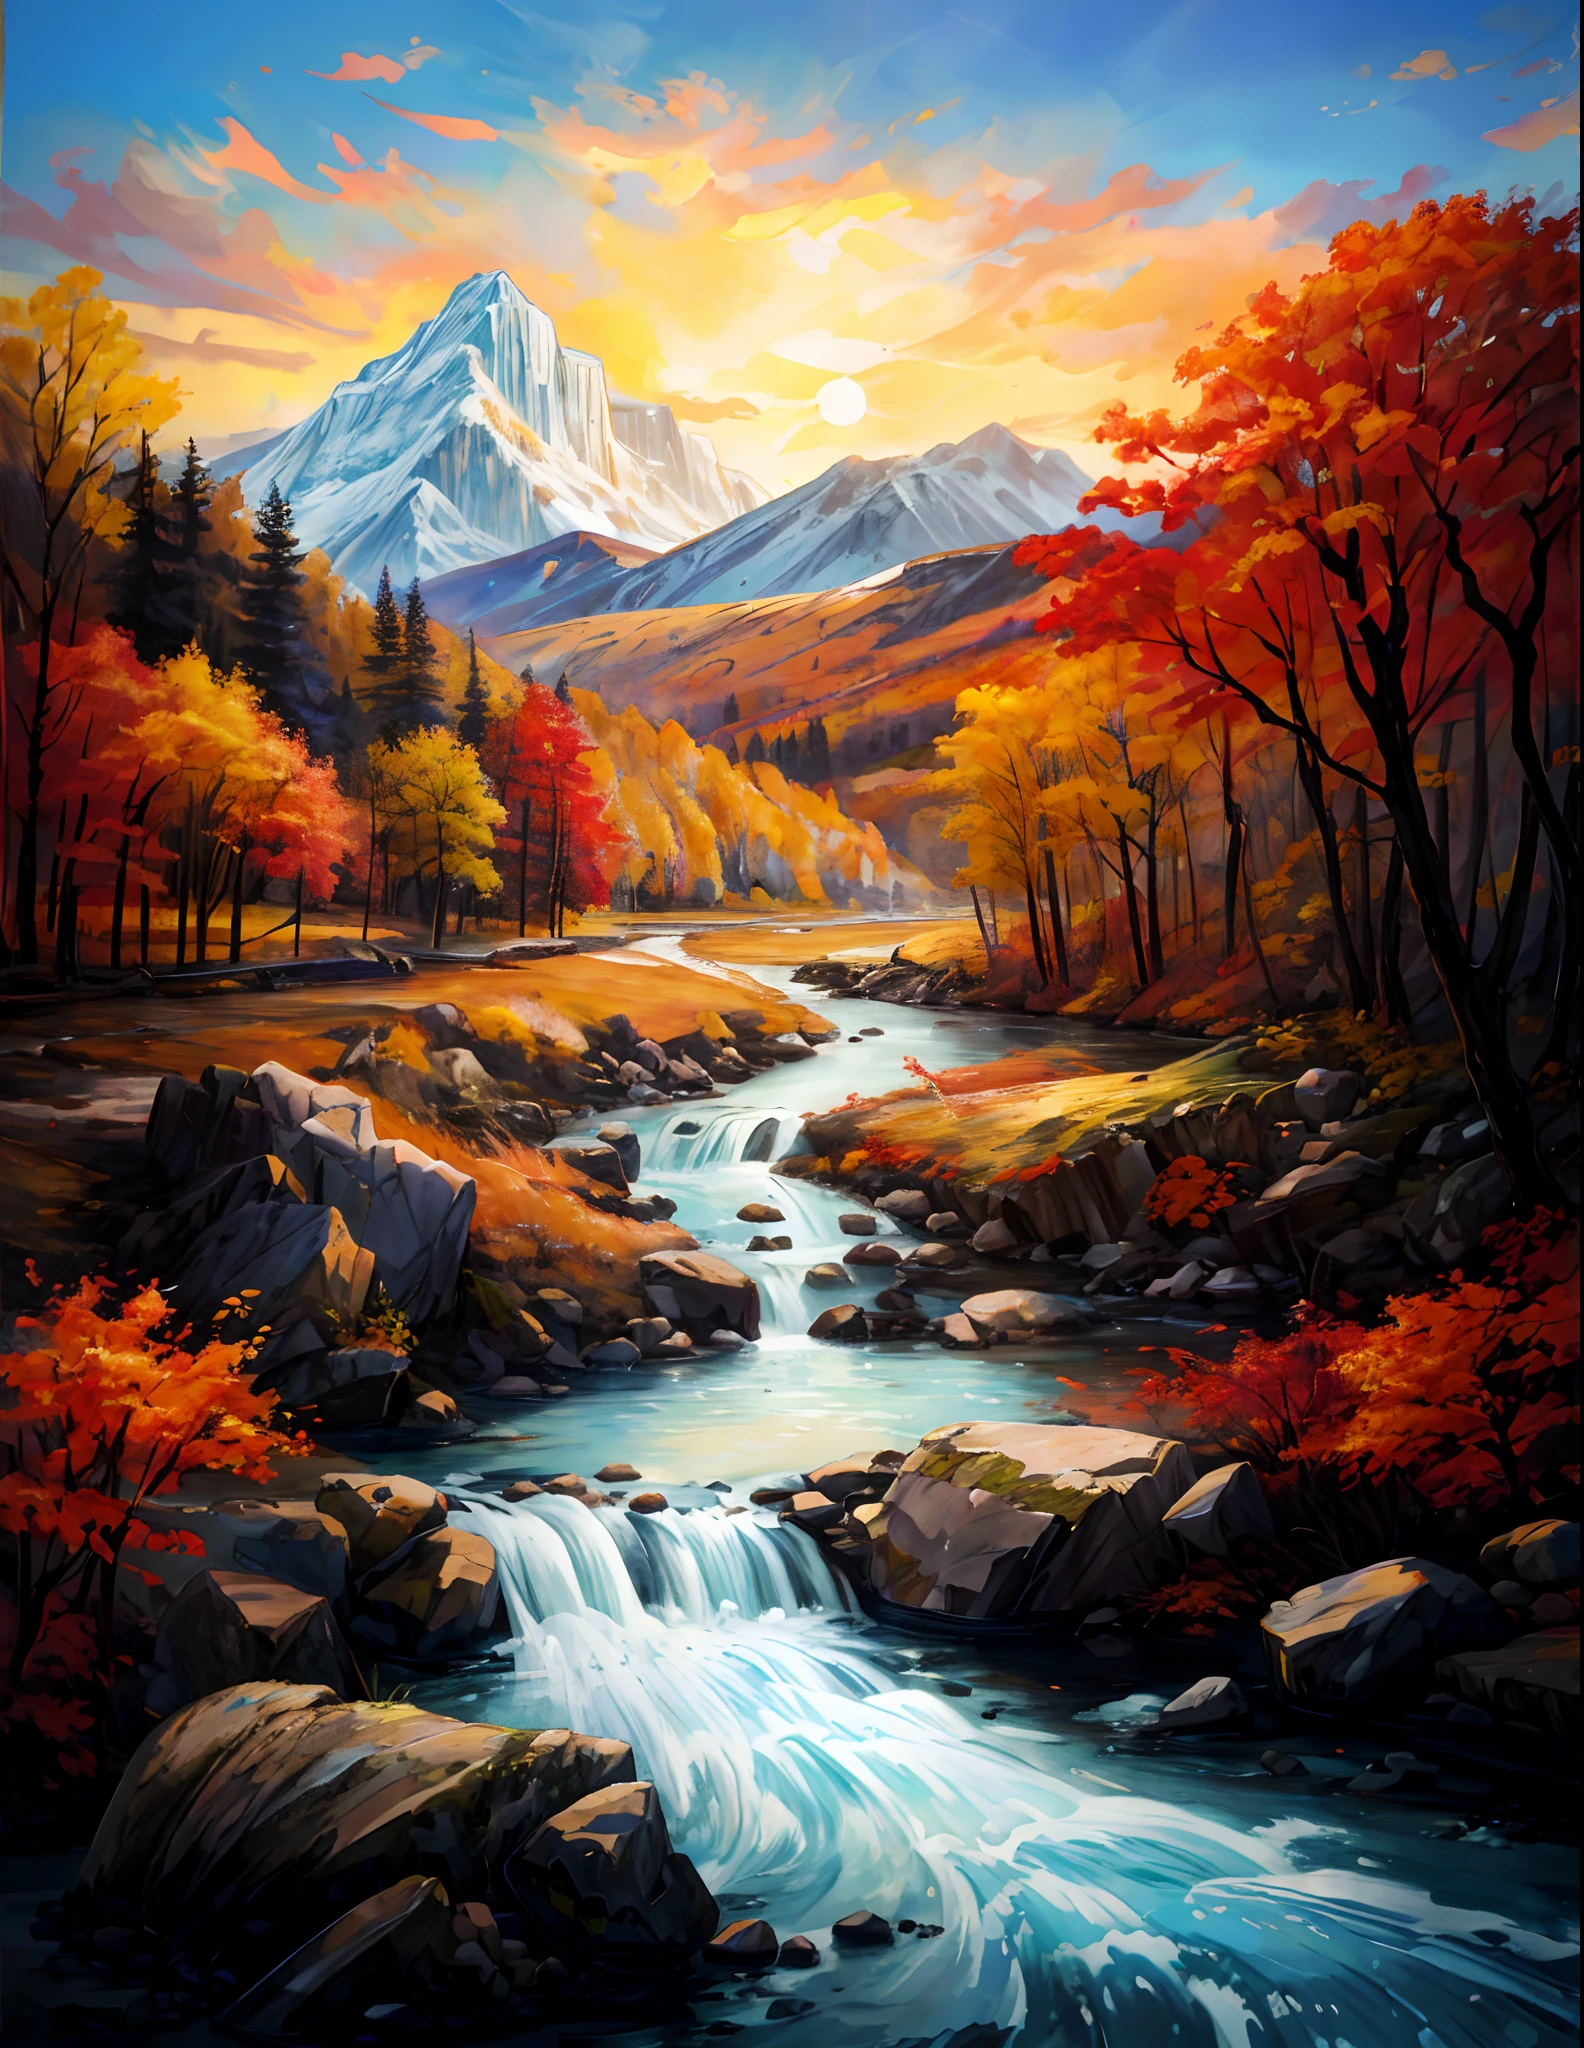 painting of a mountain stream with a waterfall in the foreground, vibrant gouache painting scenery, autumn mountains, scenery art detailed, majestic landscape, scenery artwork, colorful landscape painting, mountains river trees, breathtaking masterpiece of art, fantastic landscape, a beautiful landscape, beautiful art uhd 4 k, rich picturesque colors, dramatic autumn landscape, detailed painting 4 k, beautiful landscape, amazing landscape